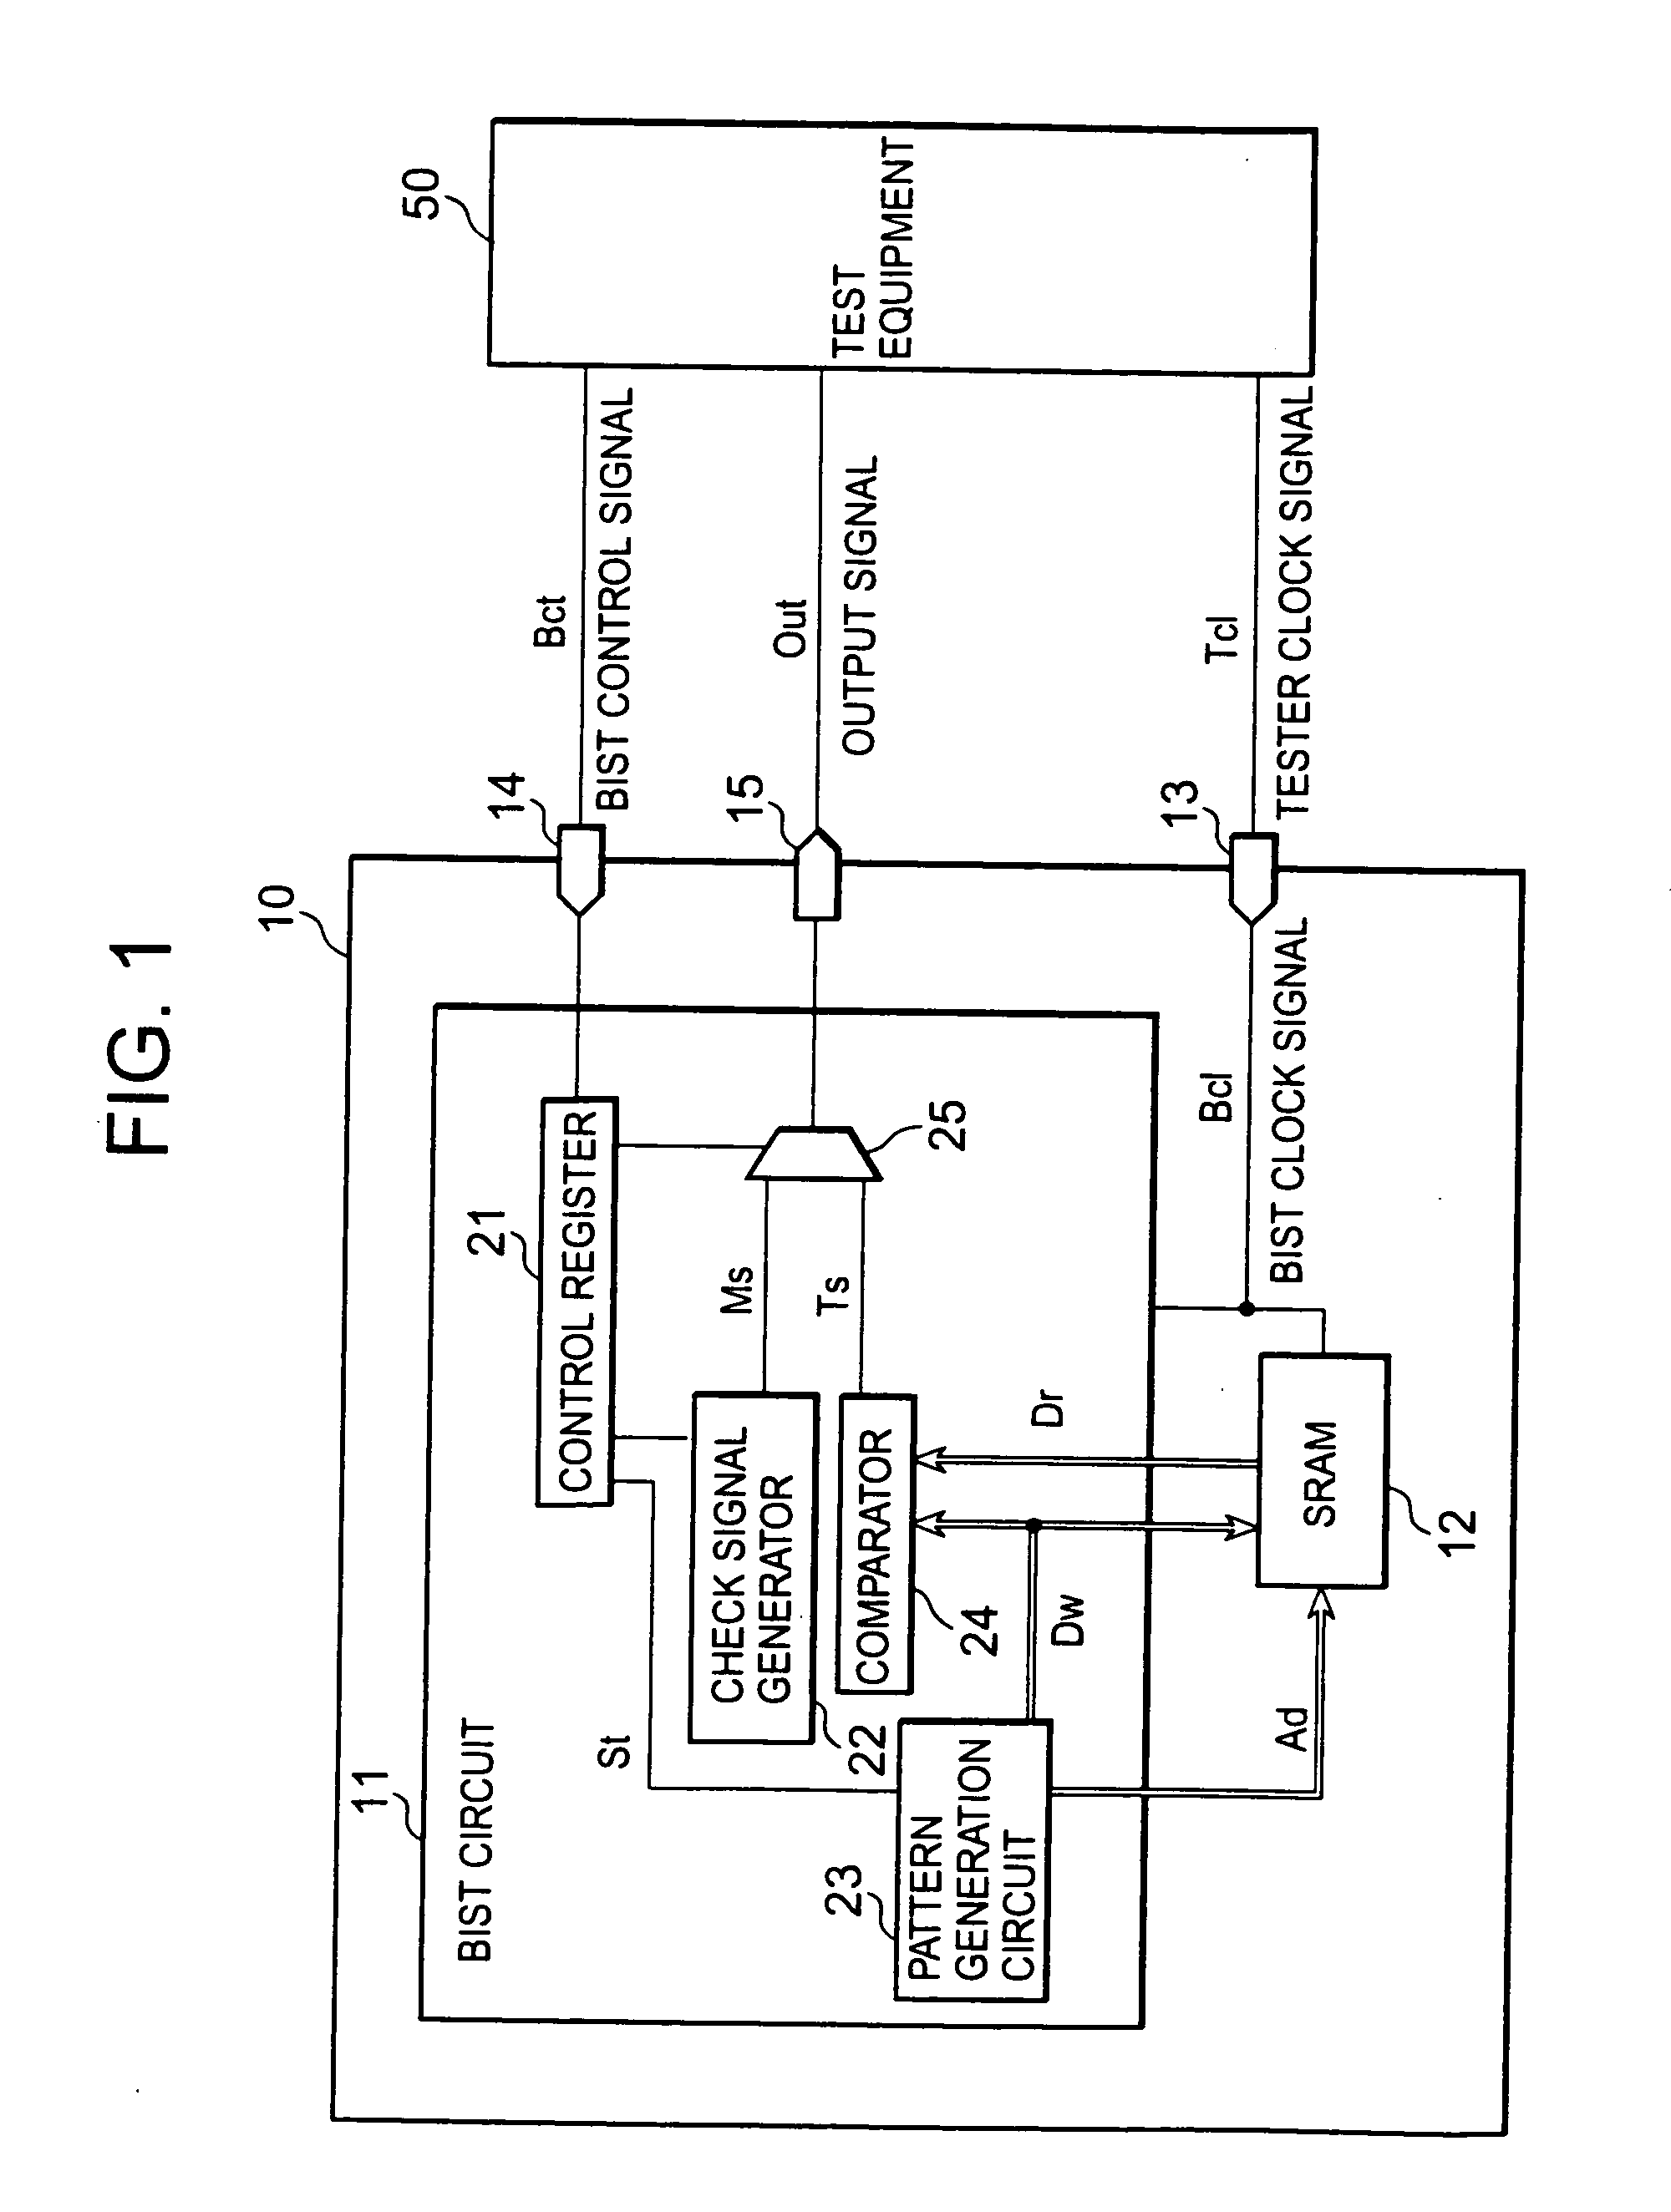 Semiconductor device having built-in self-test circuit and method of testing the same